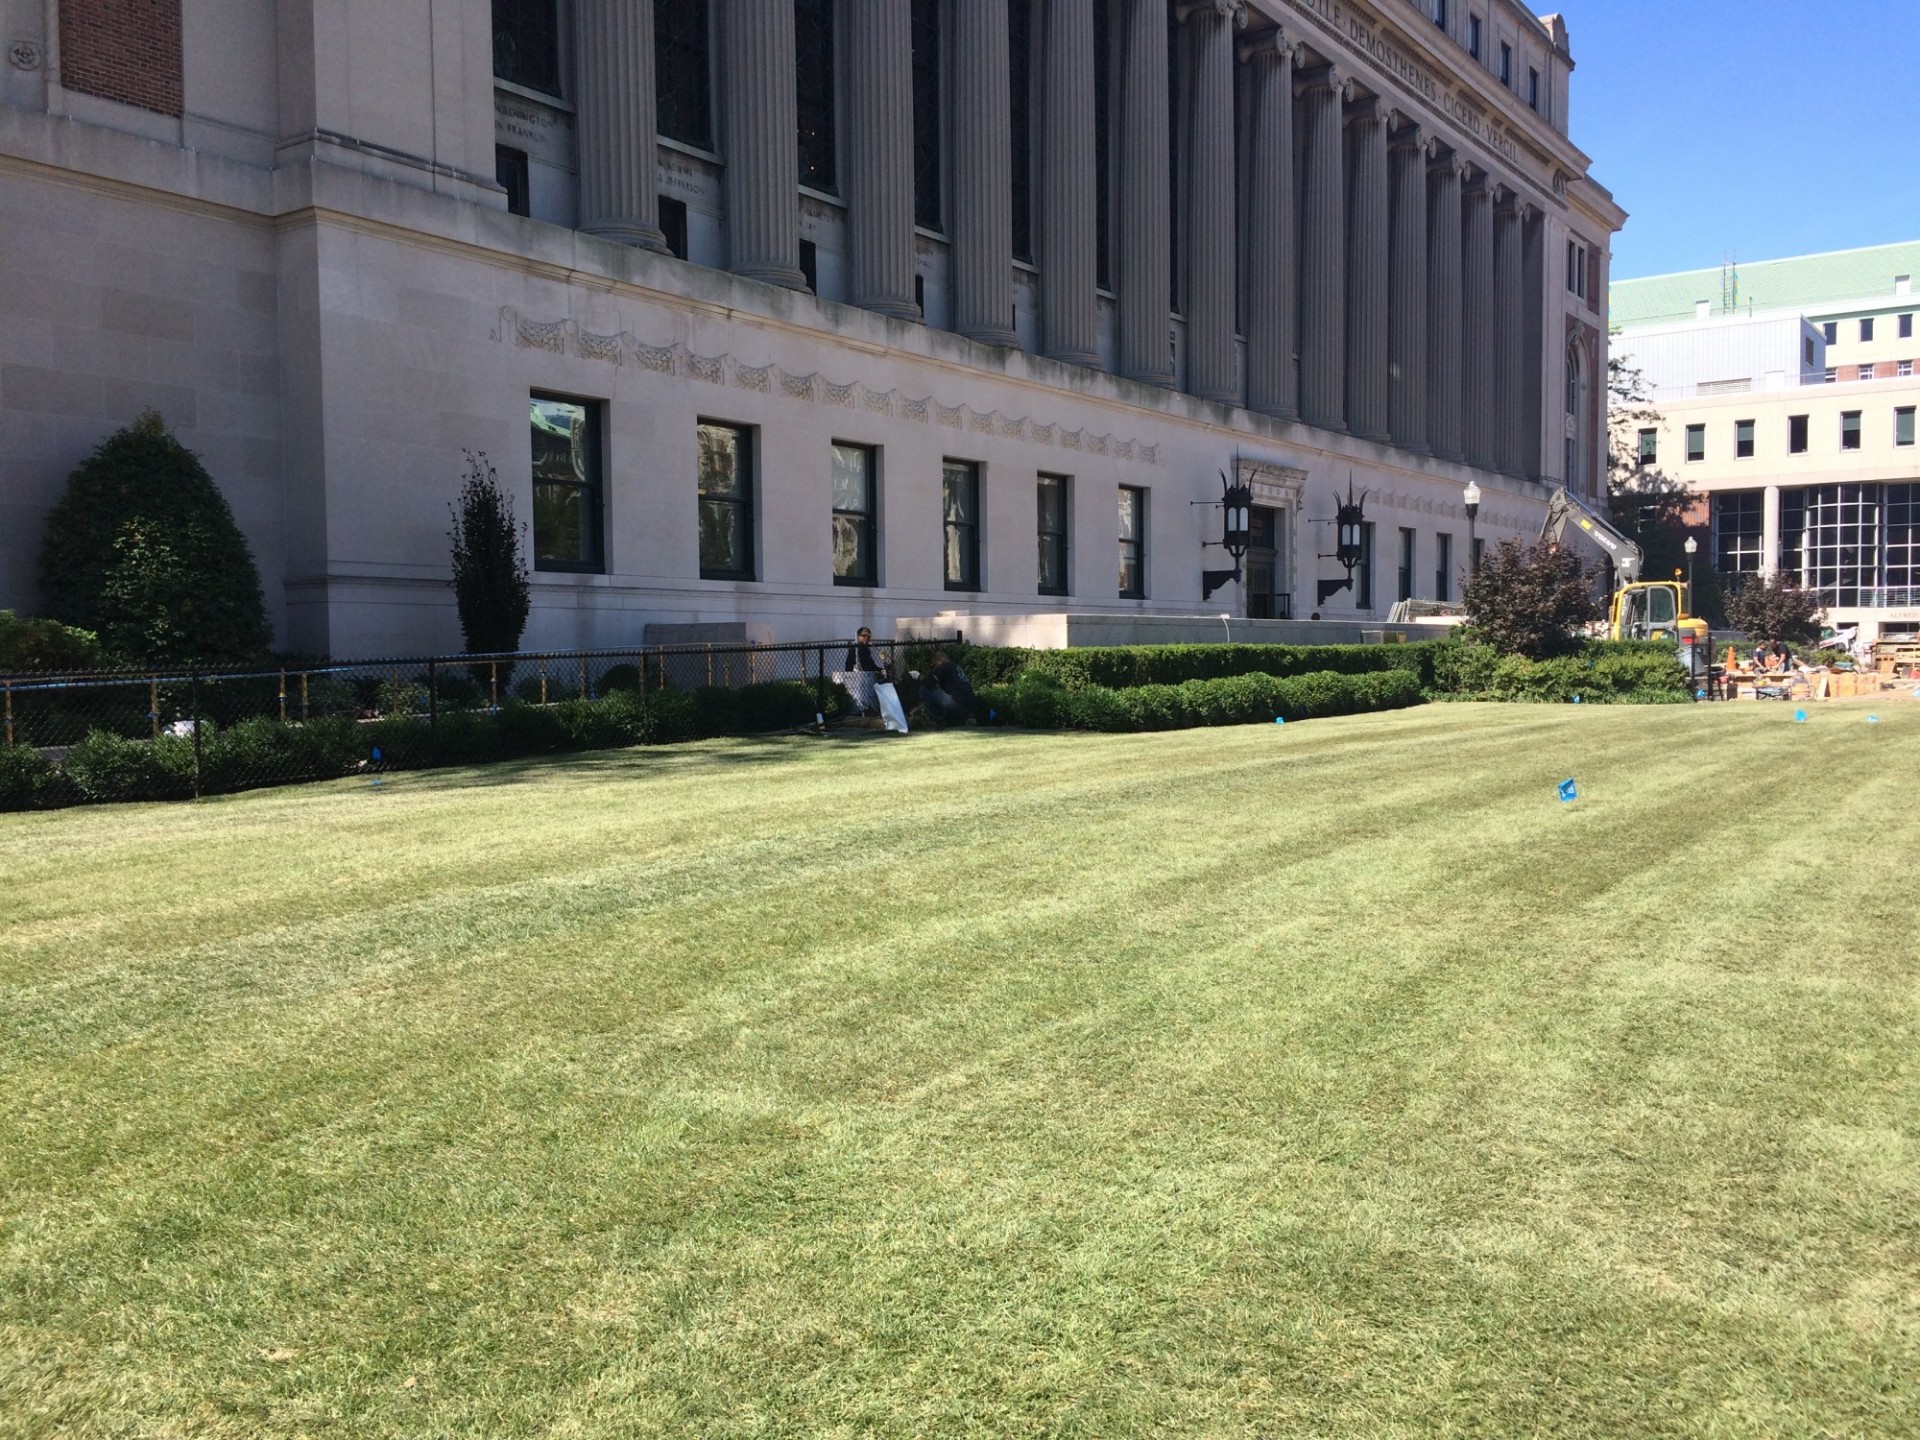 New sod at the southern portion of South Lawn East (Photo from September 1, 2017)